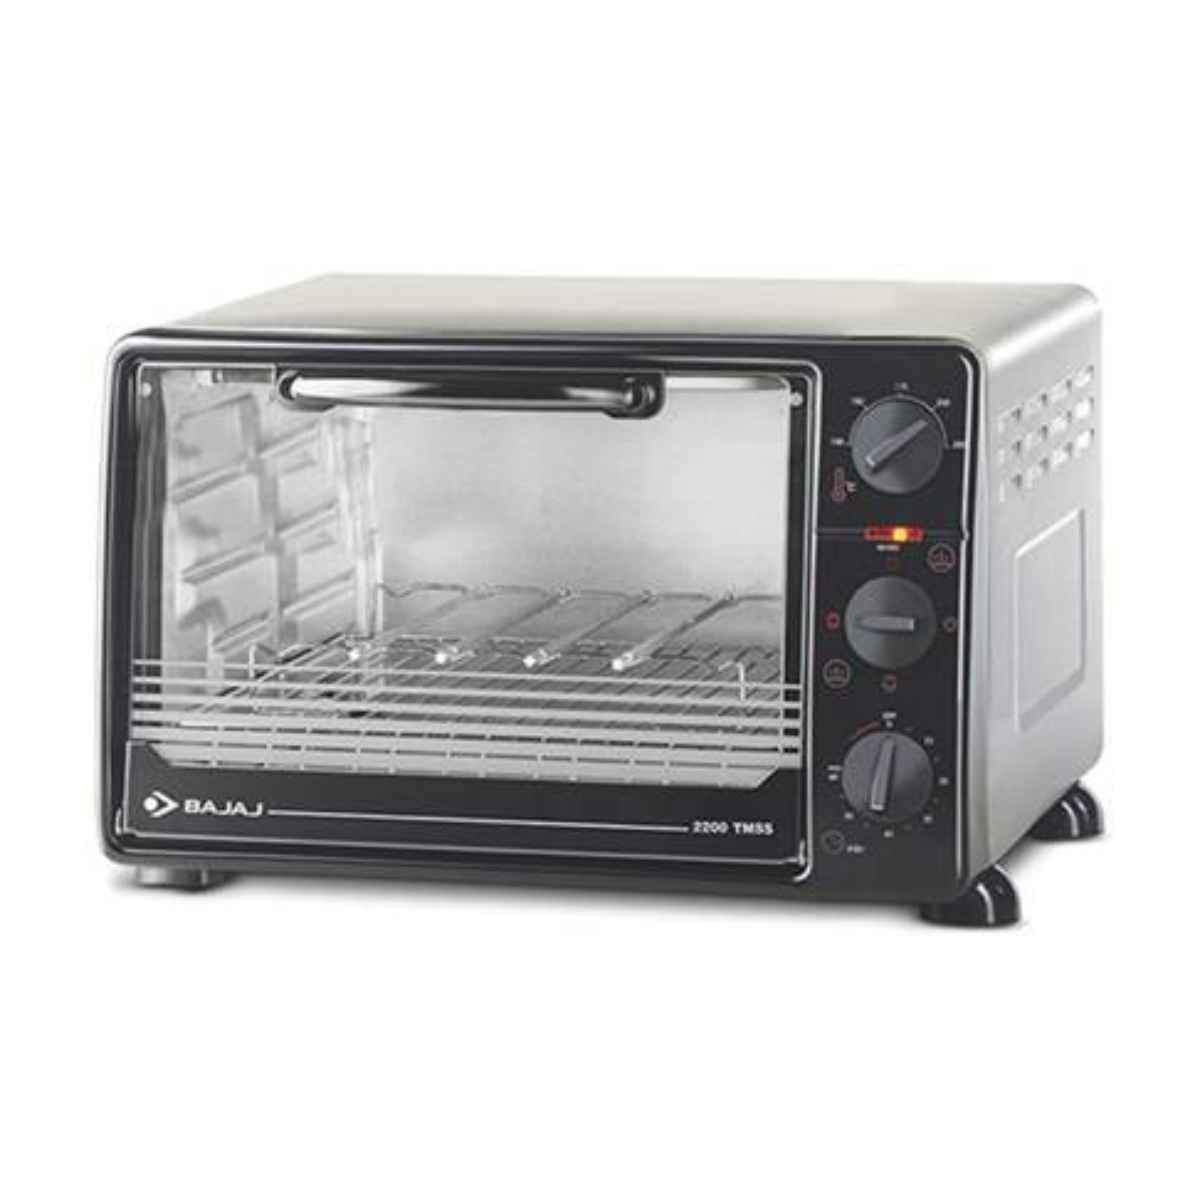 BAJAJ 22-Litre 2200TMSS Oven Toaster Grill 